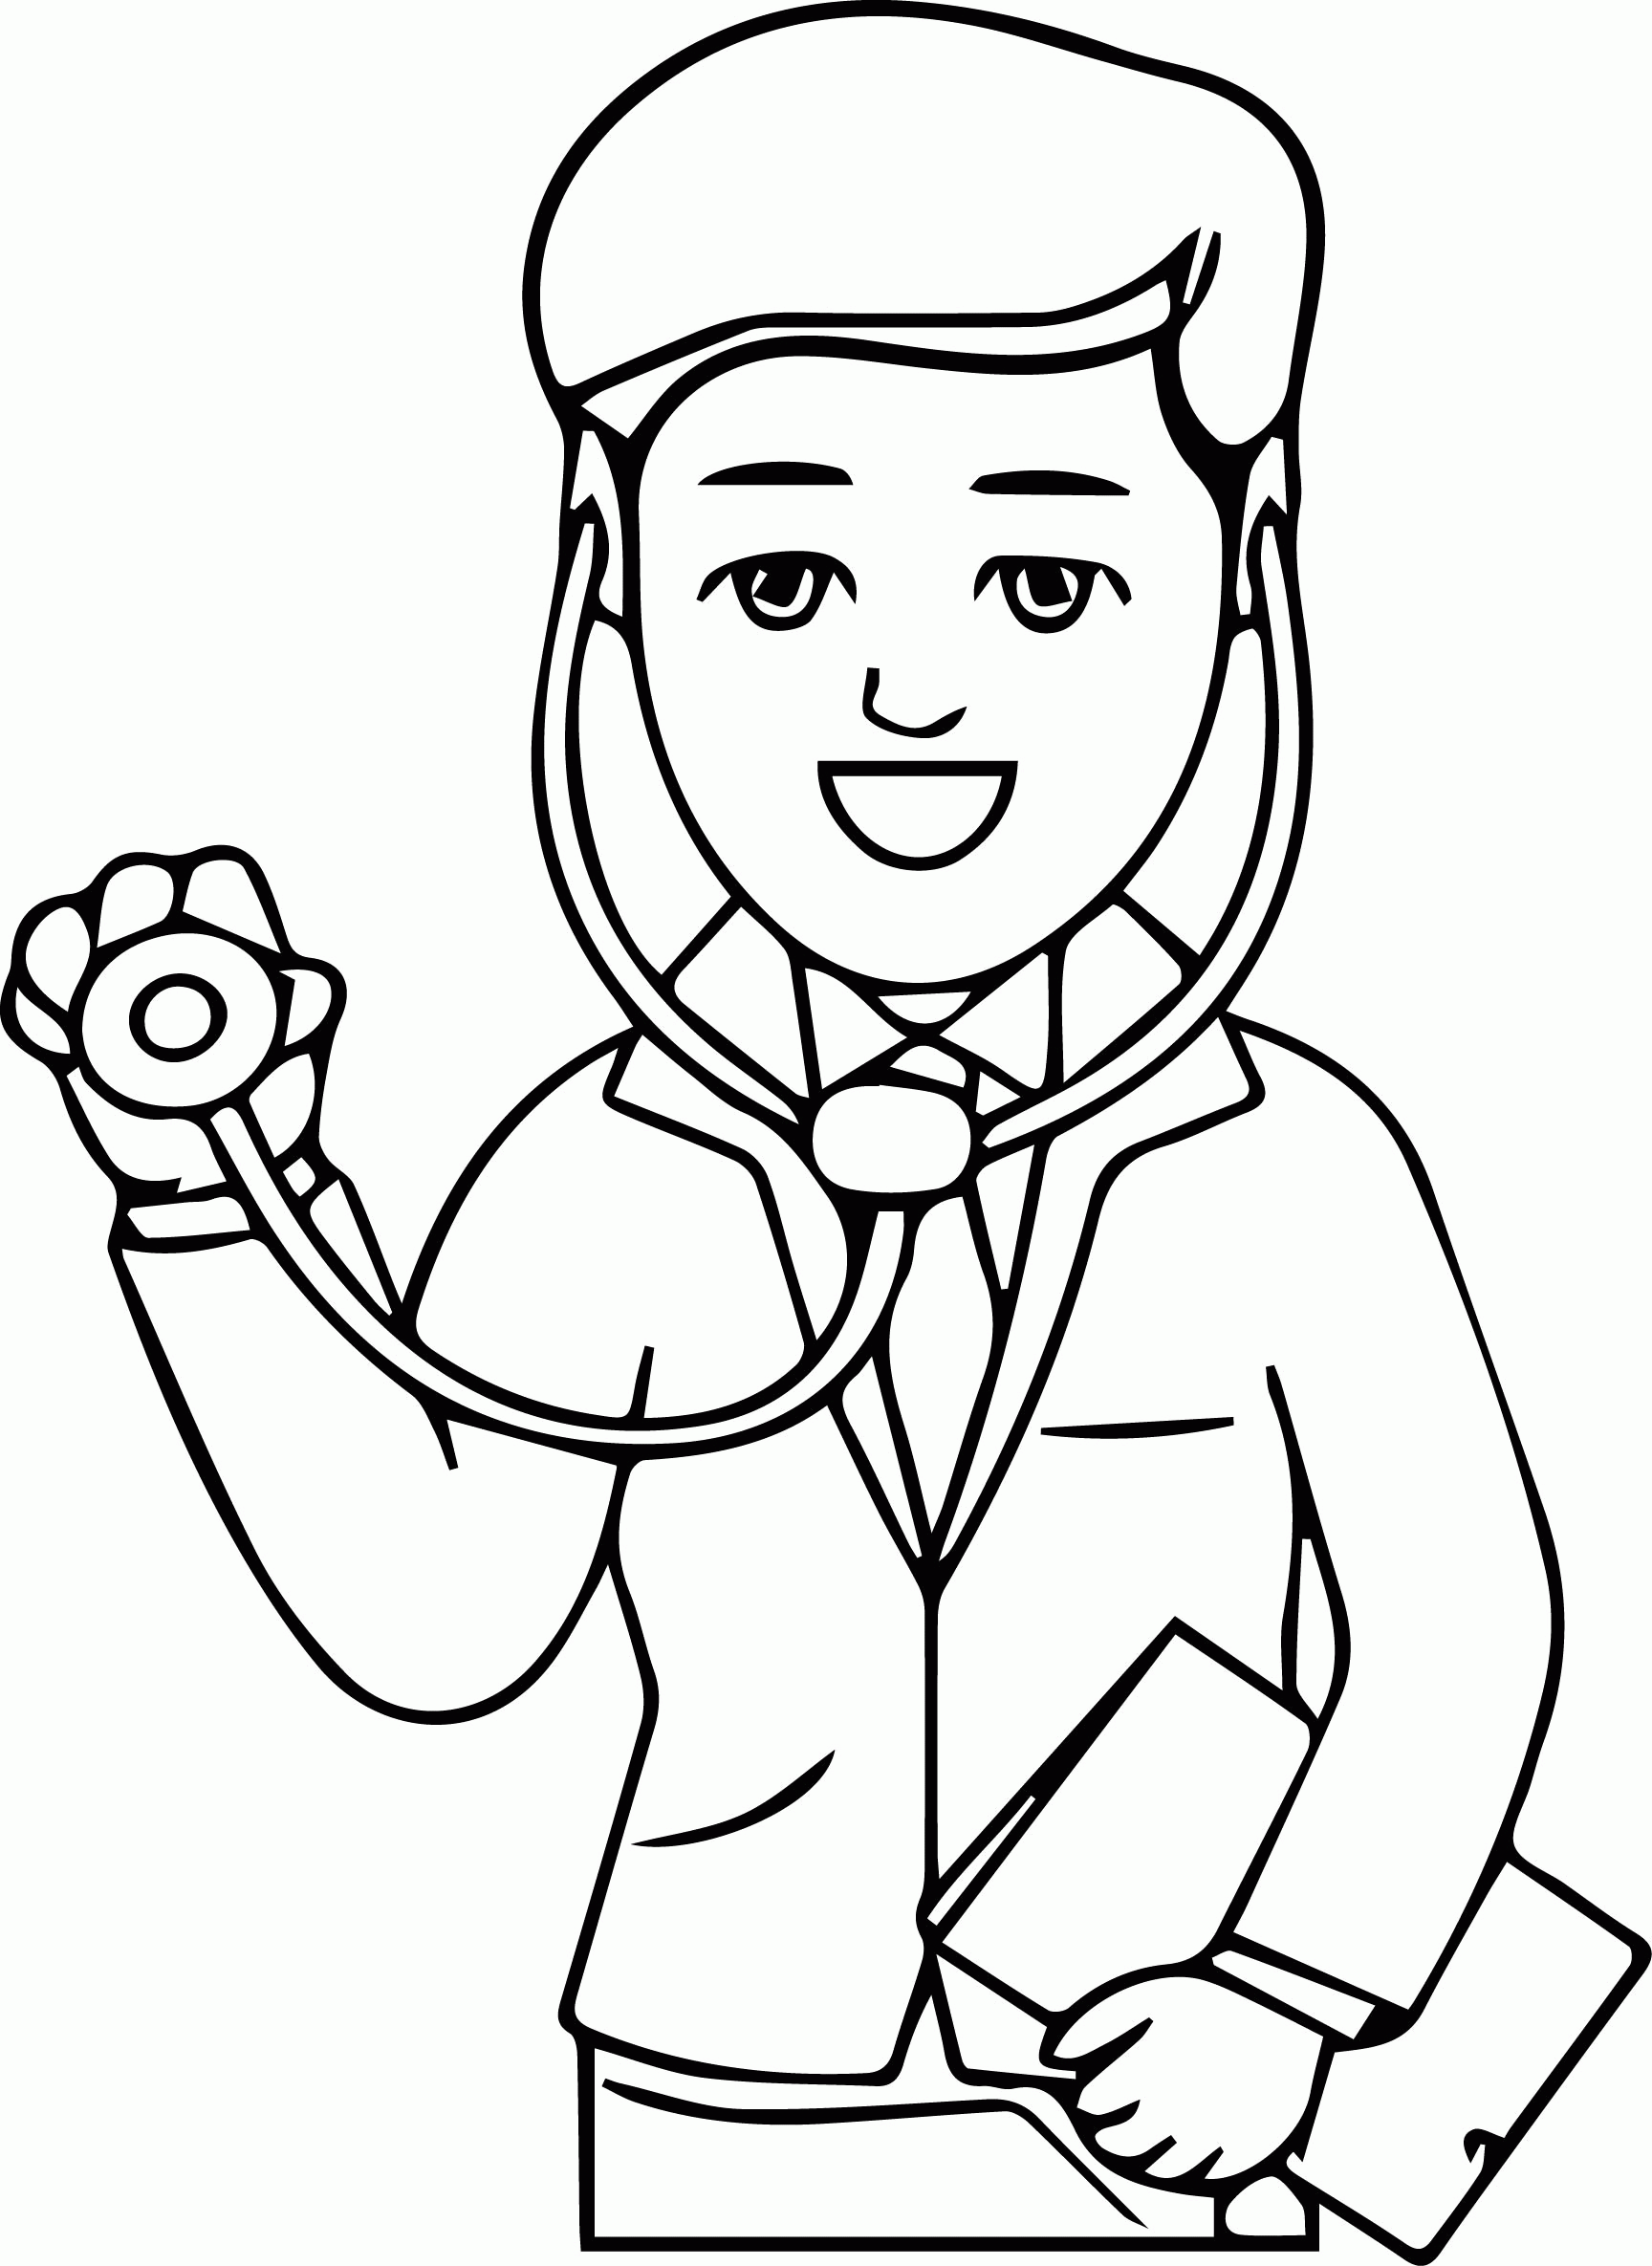 A Doctor Coloring Page Printable Sheets Doctor We Page 22 2021 a 0237 Coloring4free